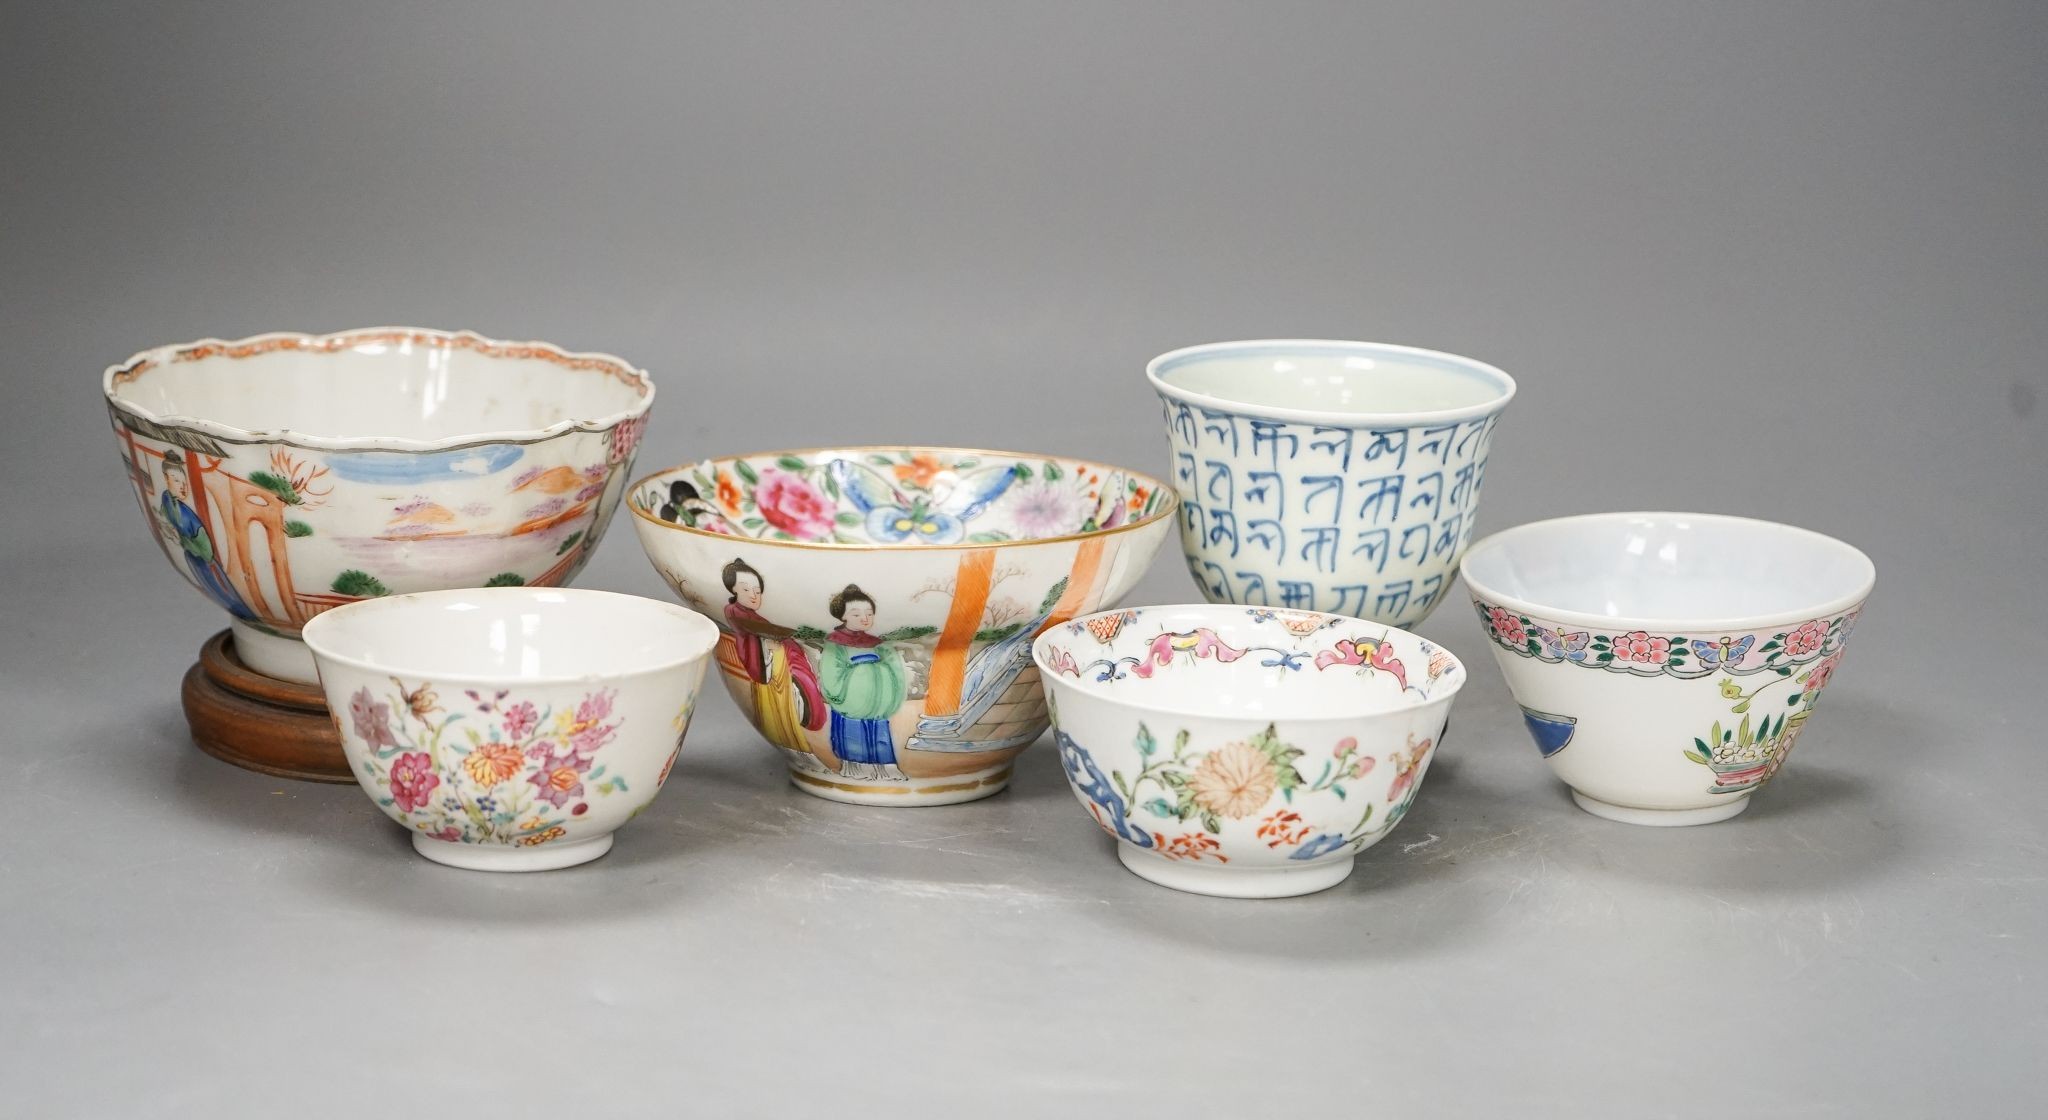 Six Chinese bowls or cups, 18th century or later, largest 11cm diam.